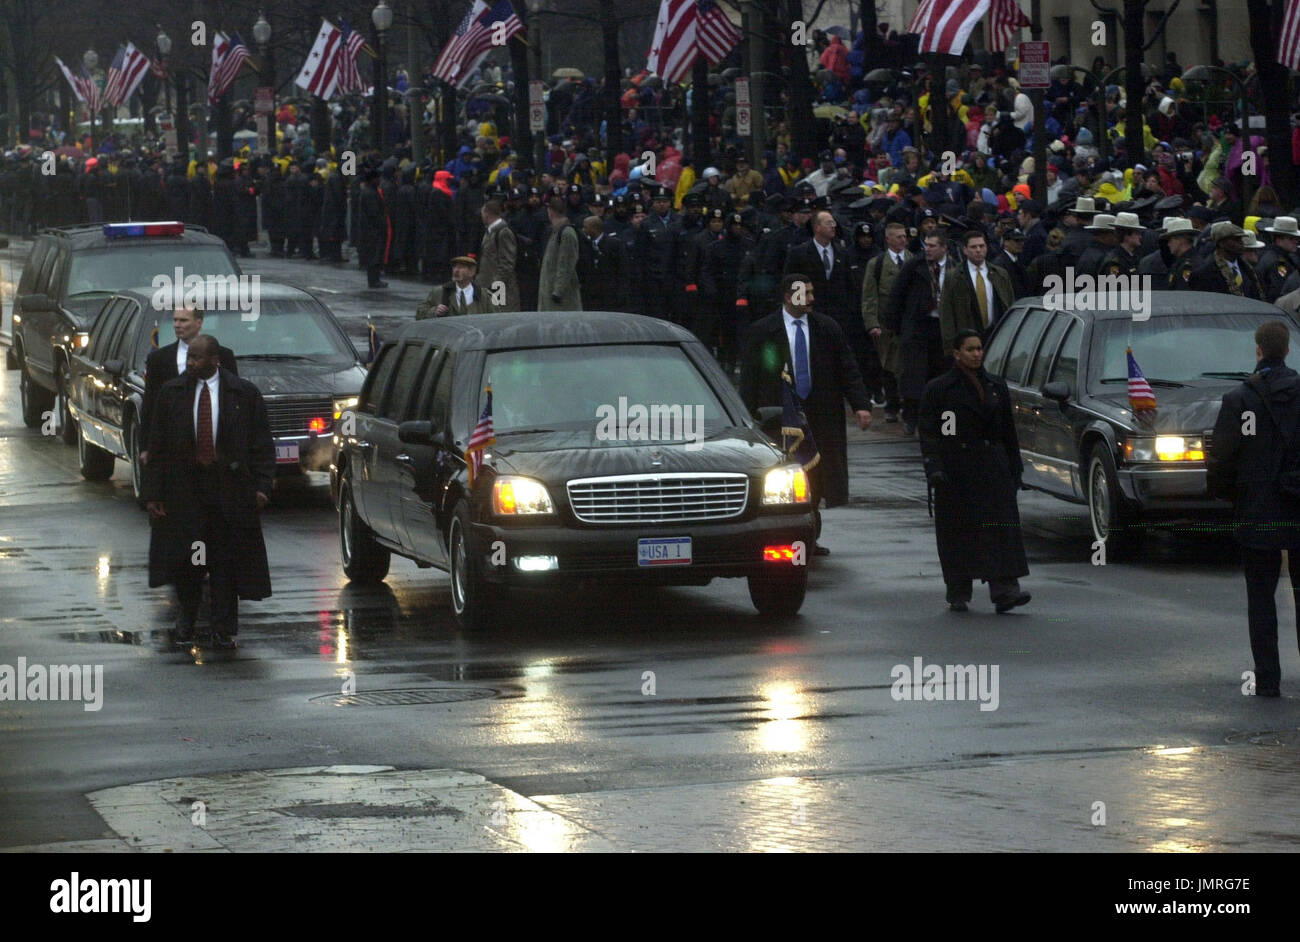 Washington, DC - January 20, 2001-- The Inaugural parade for United States President George W. Bush makes its way down Pennsylvania Avenue from the United States Capitol to the White House. Credit: Ron Sachs / CNP Stock Photo